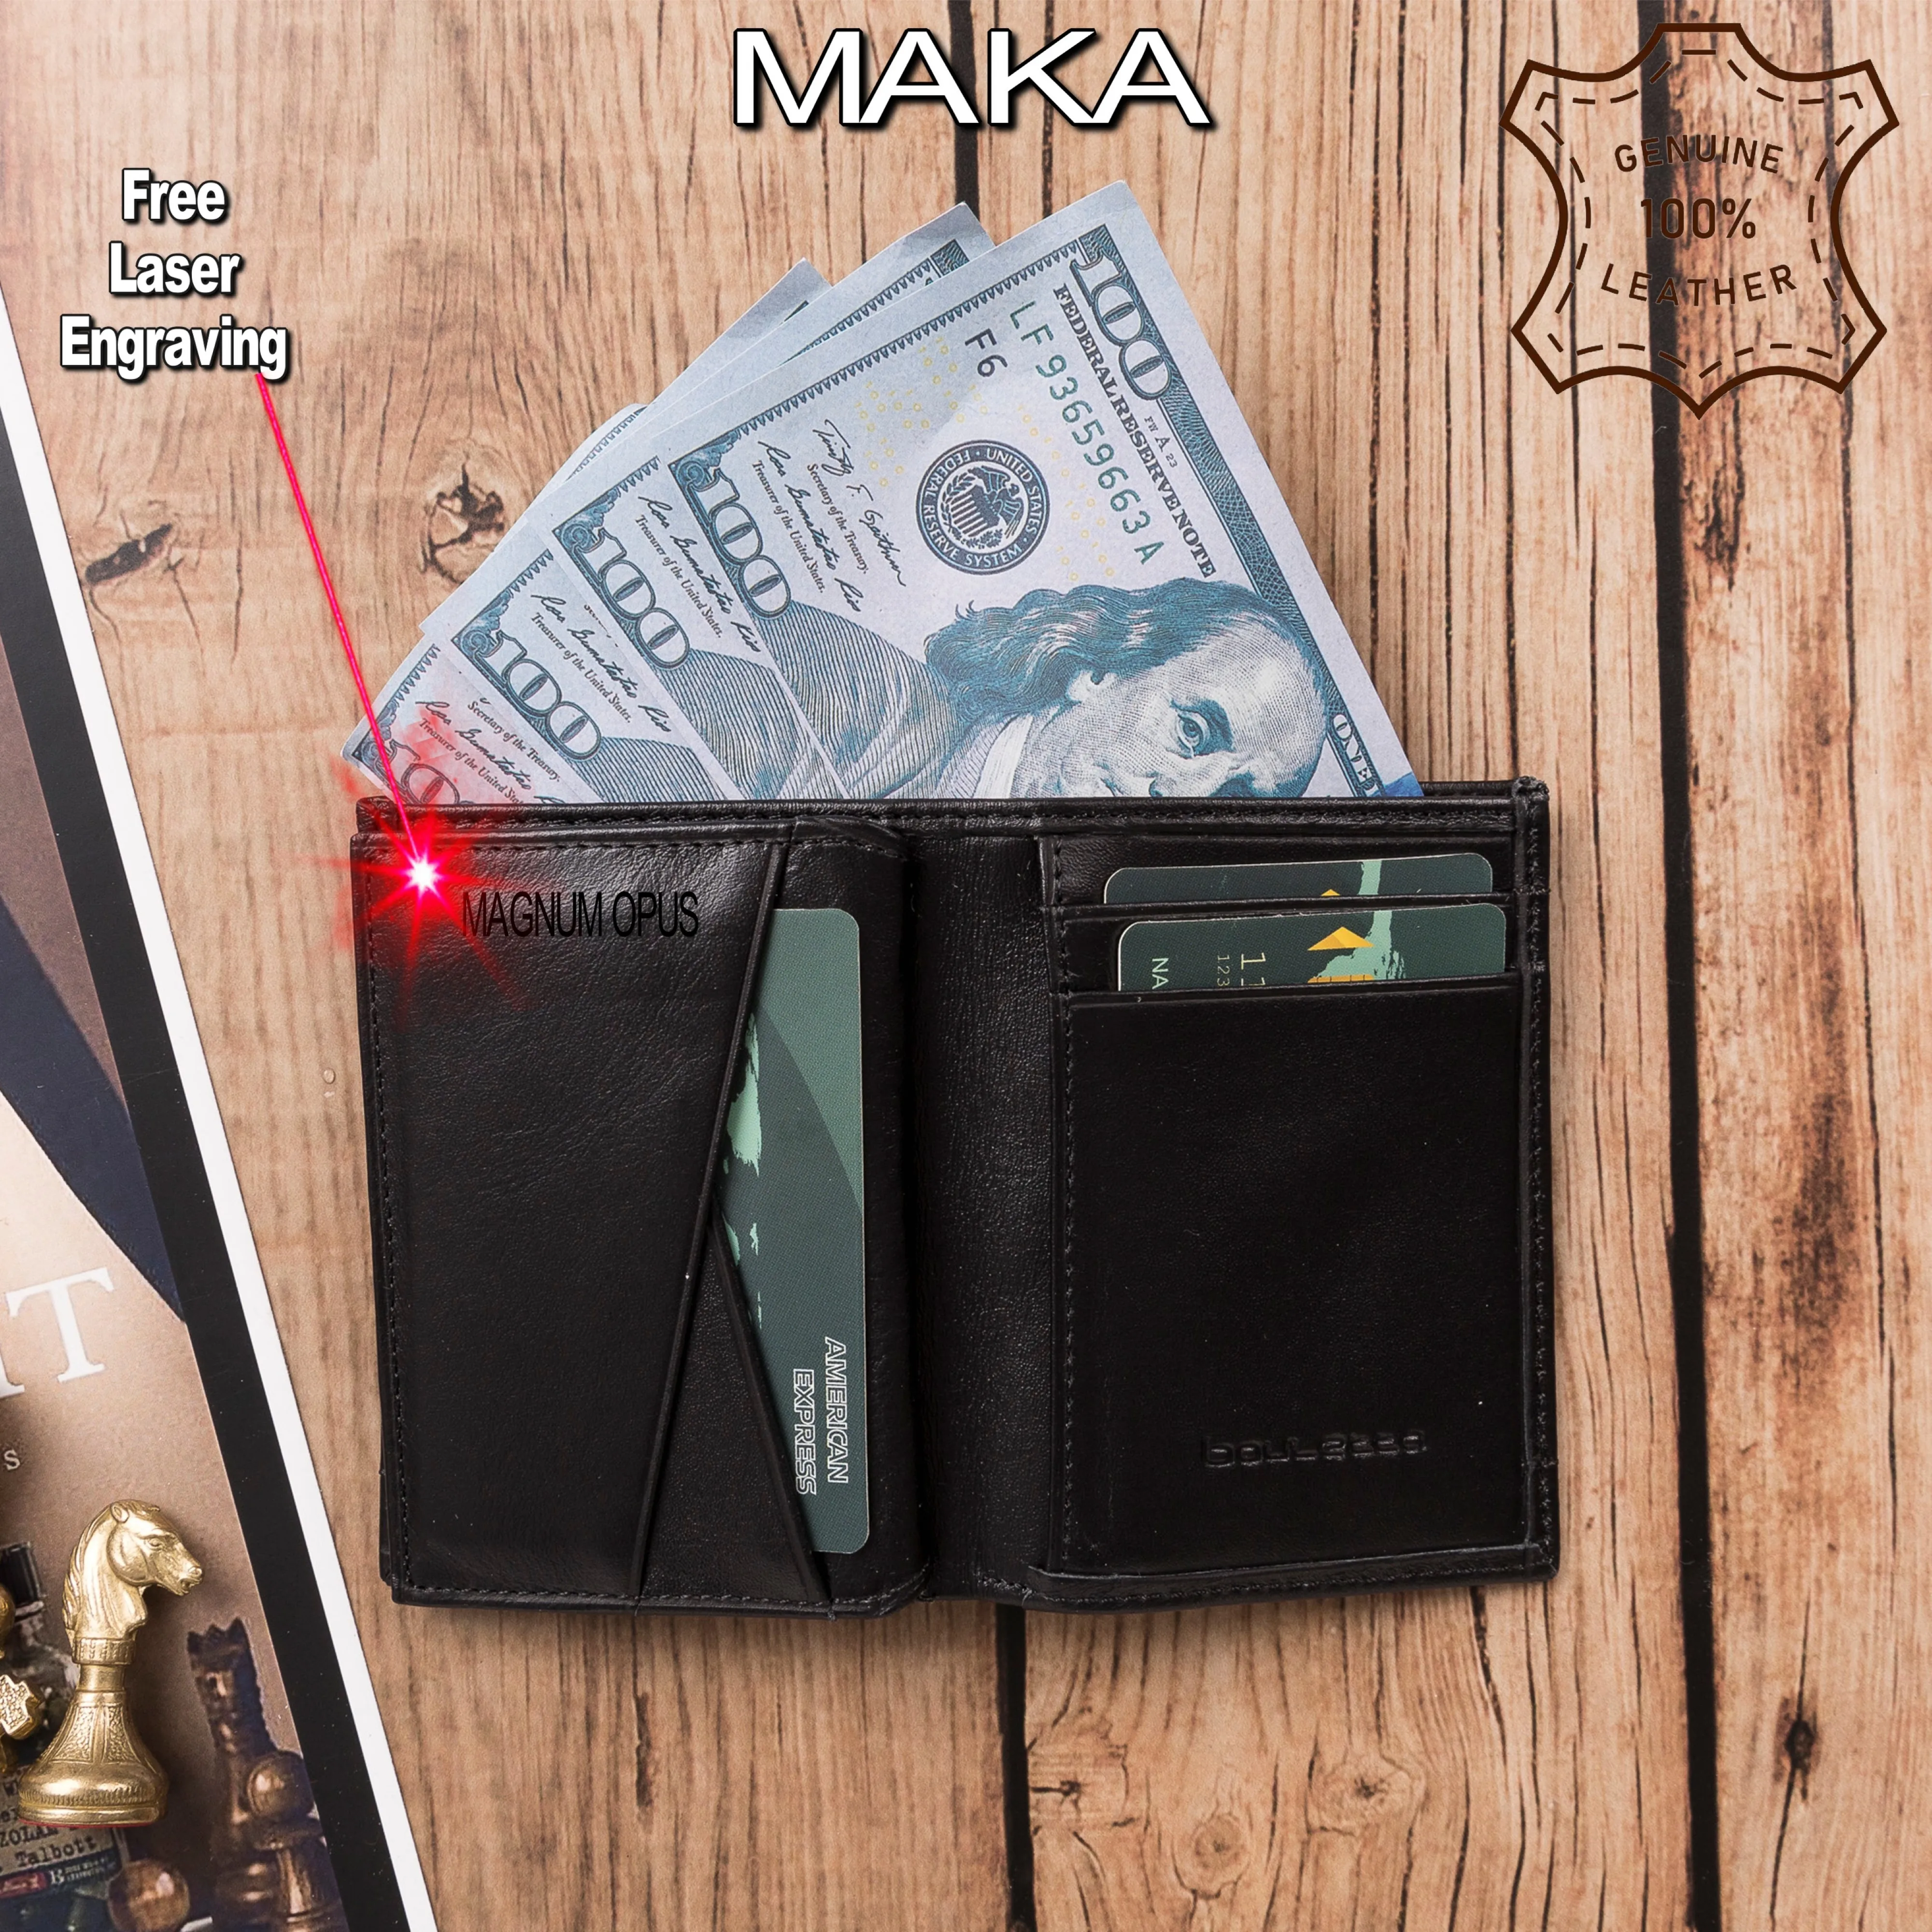 Handmade Genuine Leather Elegant Trendy Stylish Card Holder Wallet Book Type Closure that Holds up to 6 Cards and Paper Money